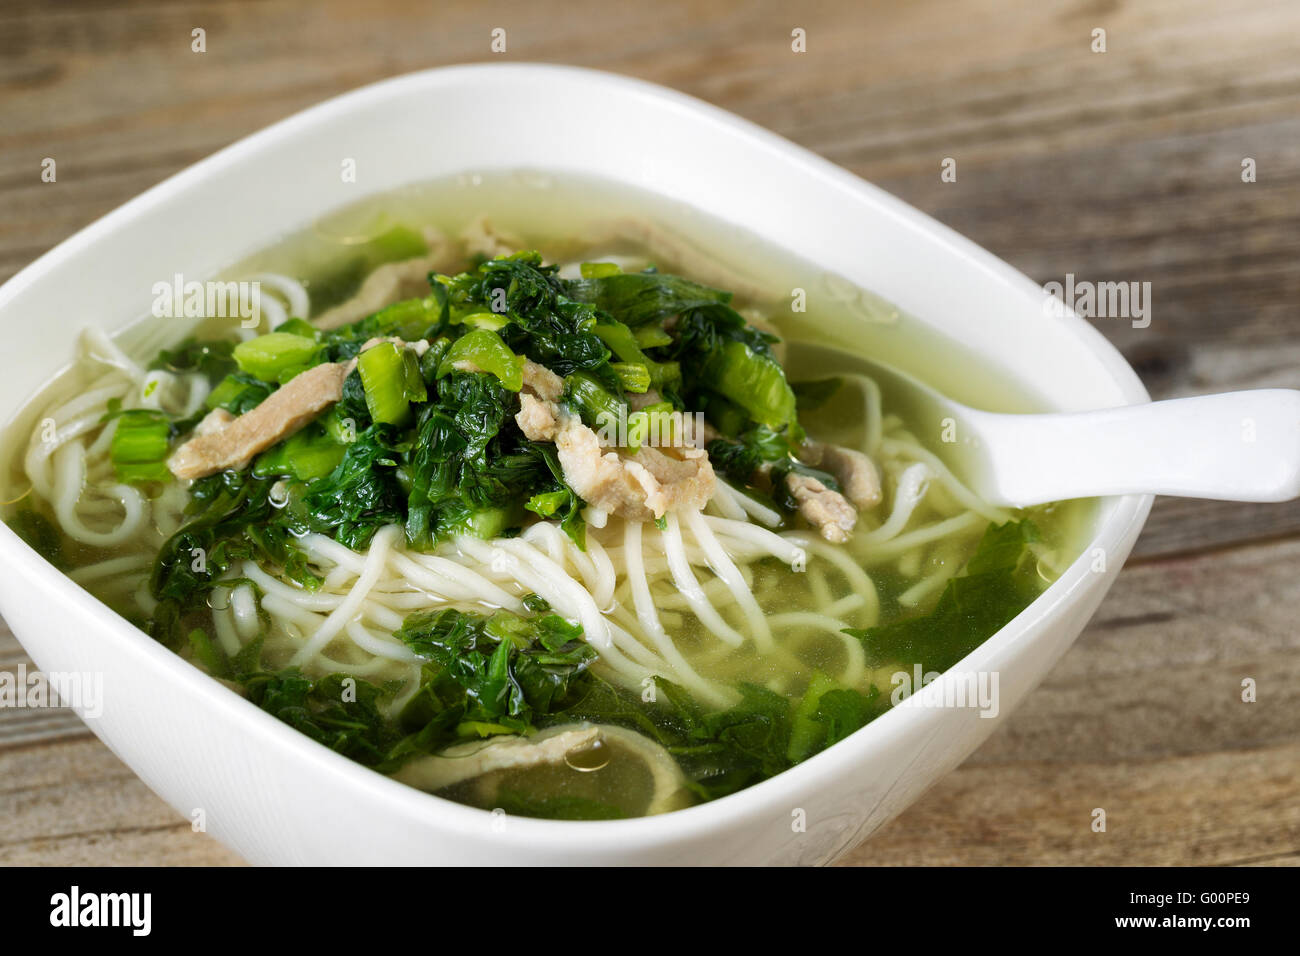 Noodle and vegetable soup ready to eat Stock Photo